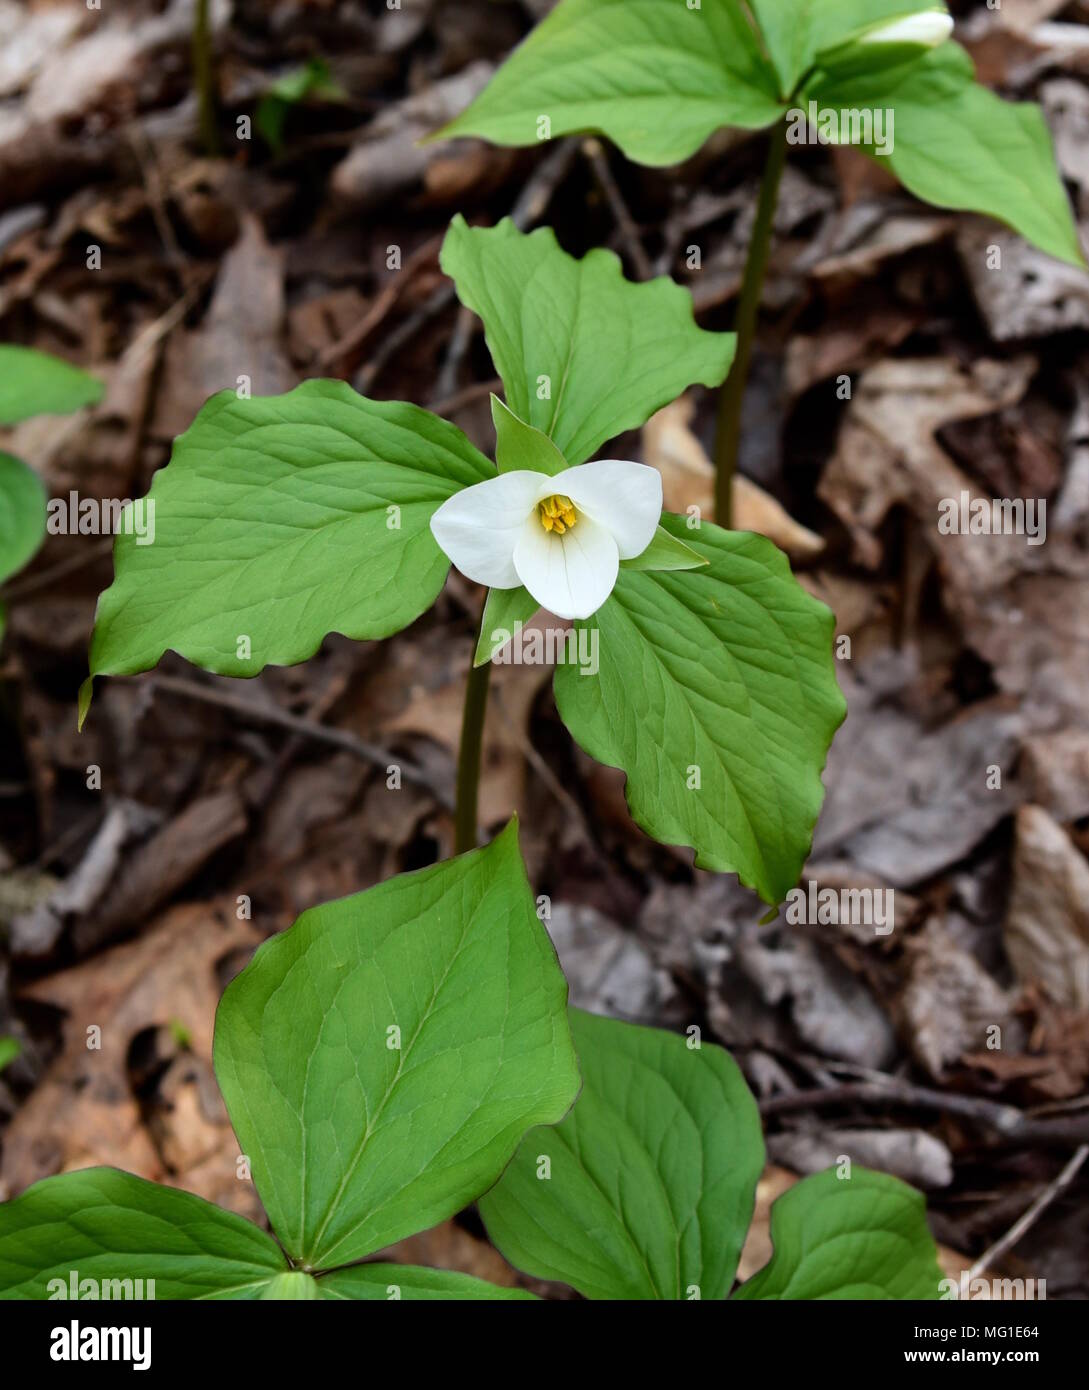 Bright large white trillium flower and green leaves emerging in a spring forest. Stock Photo